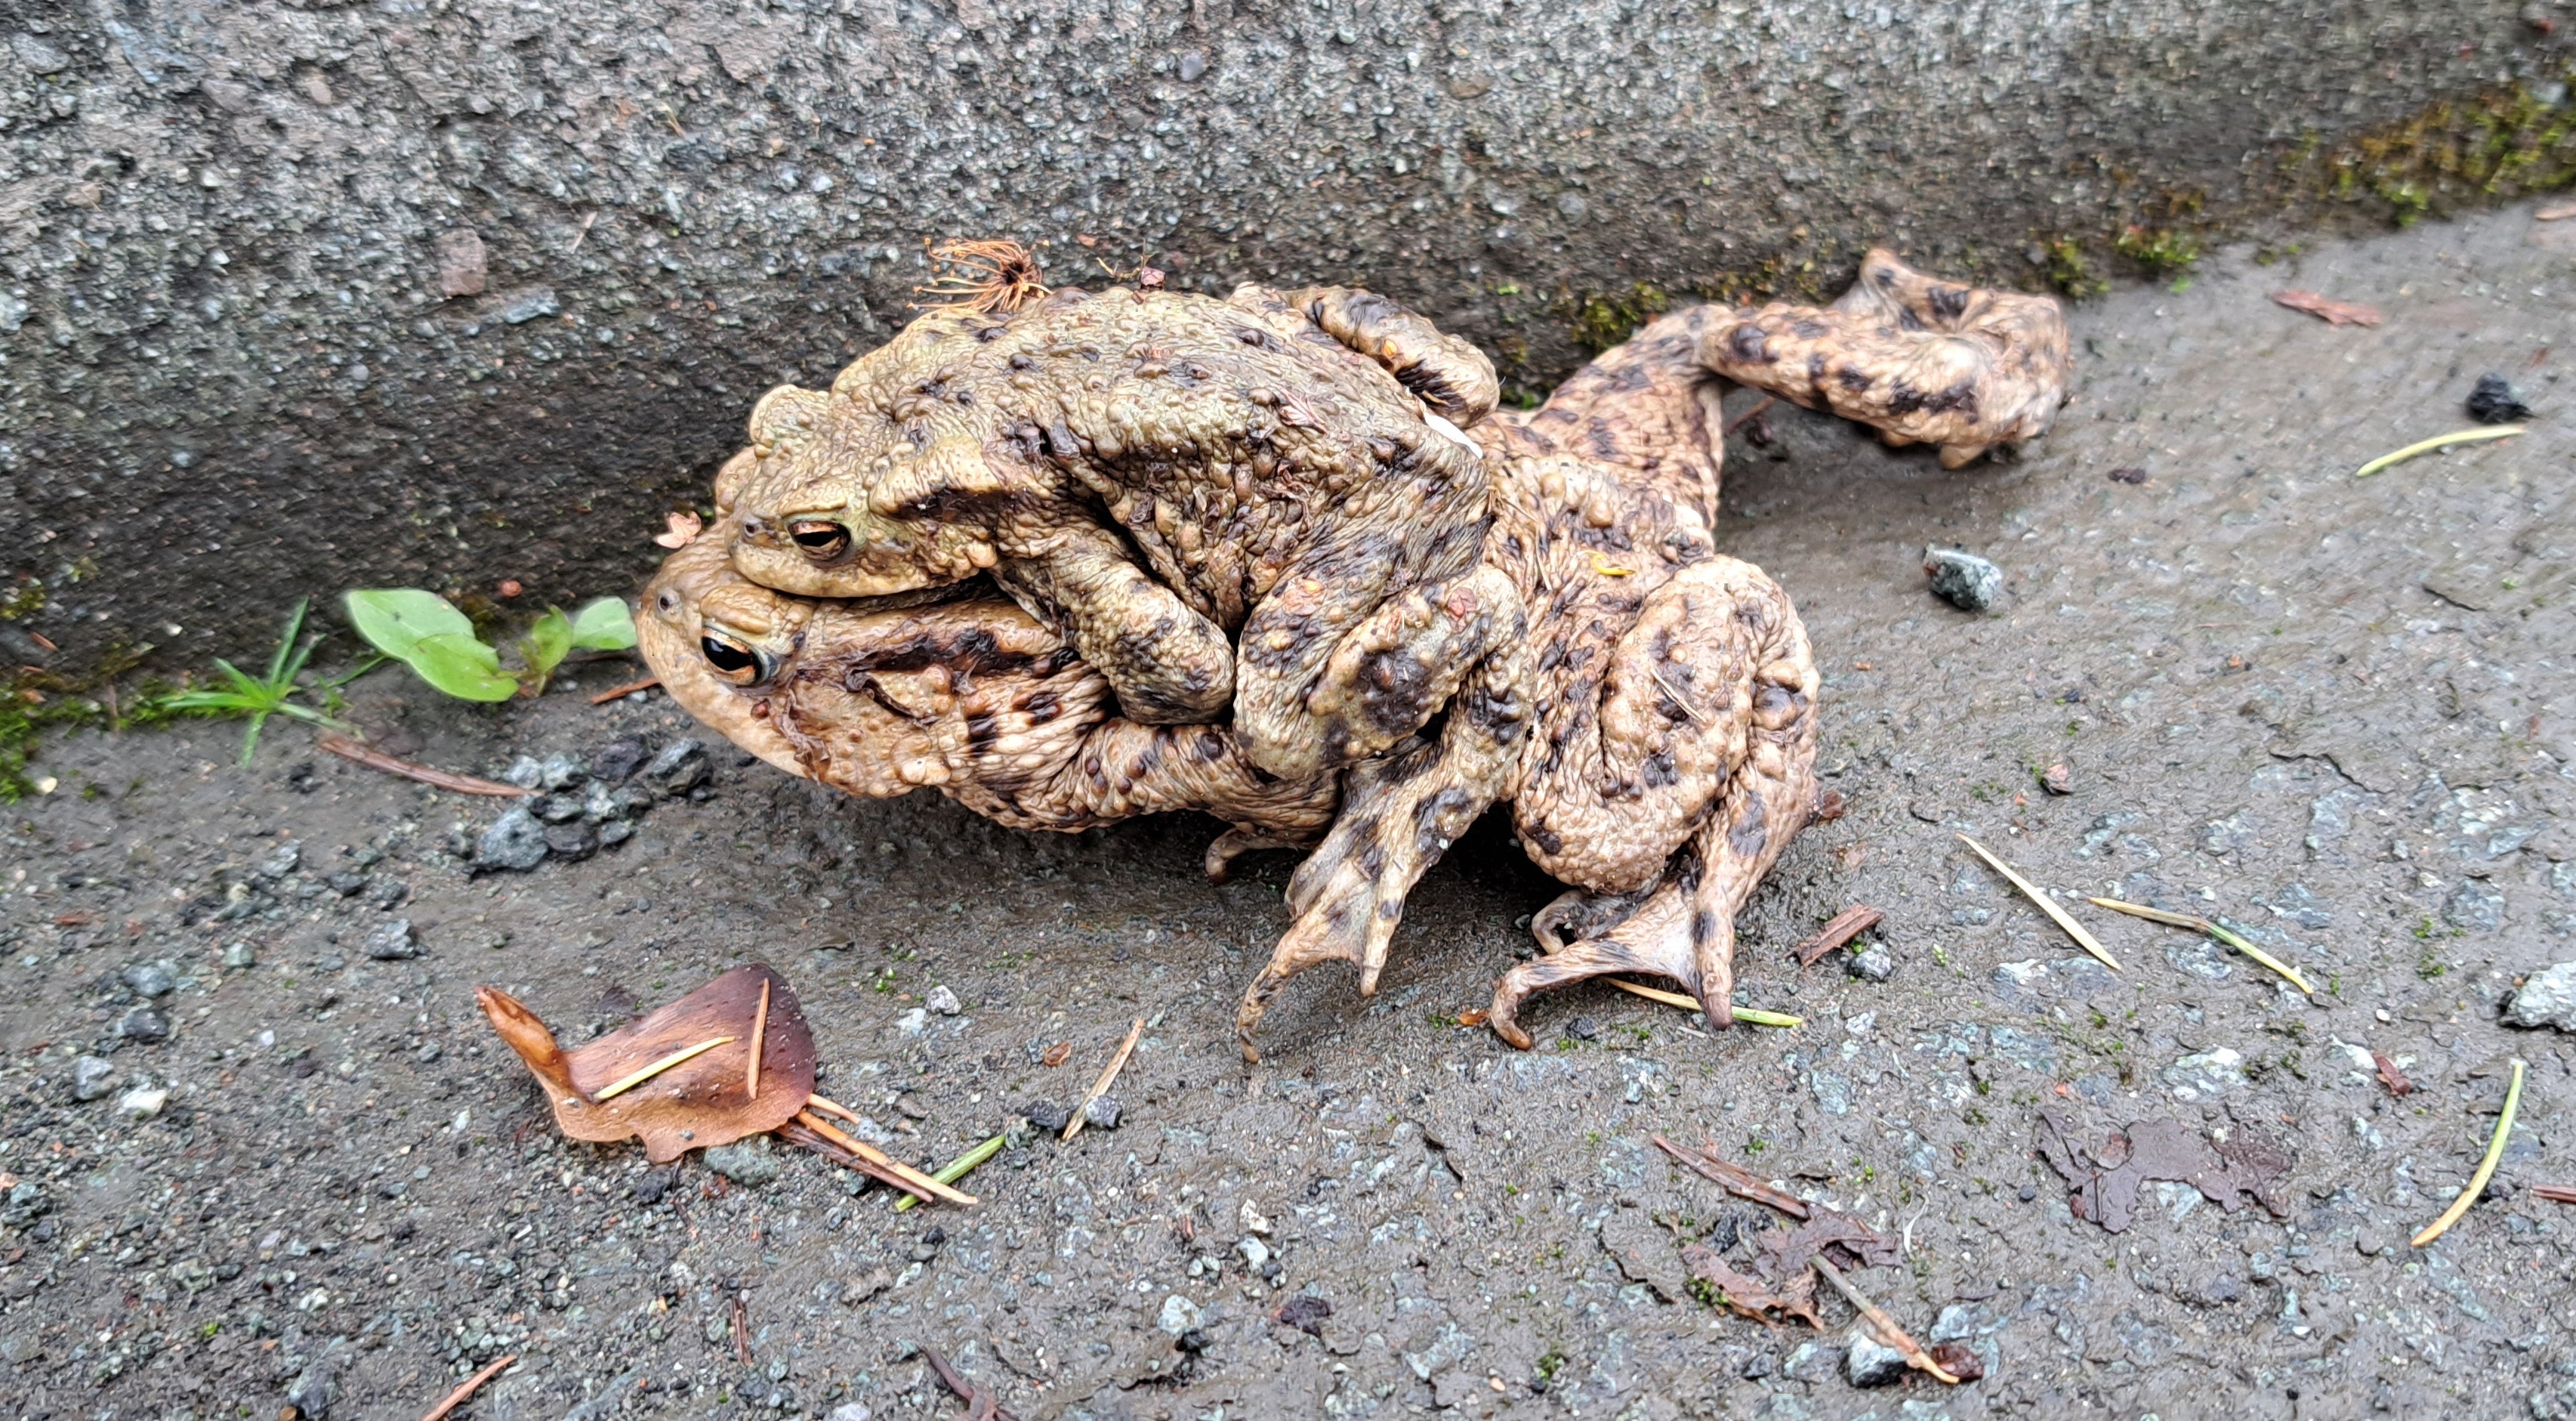 The computer heartbeat will not ignite its brain/ Instead, I want to share with you the photograph I took/ On my morning dog walk, of a female frog.../ Her tiny lover clinging to her back like a carbuncle